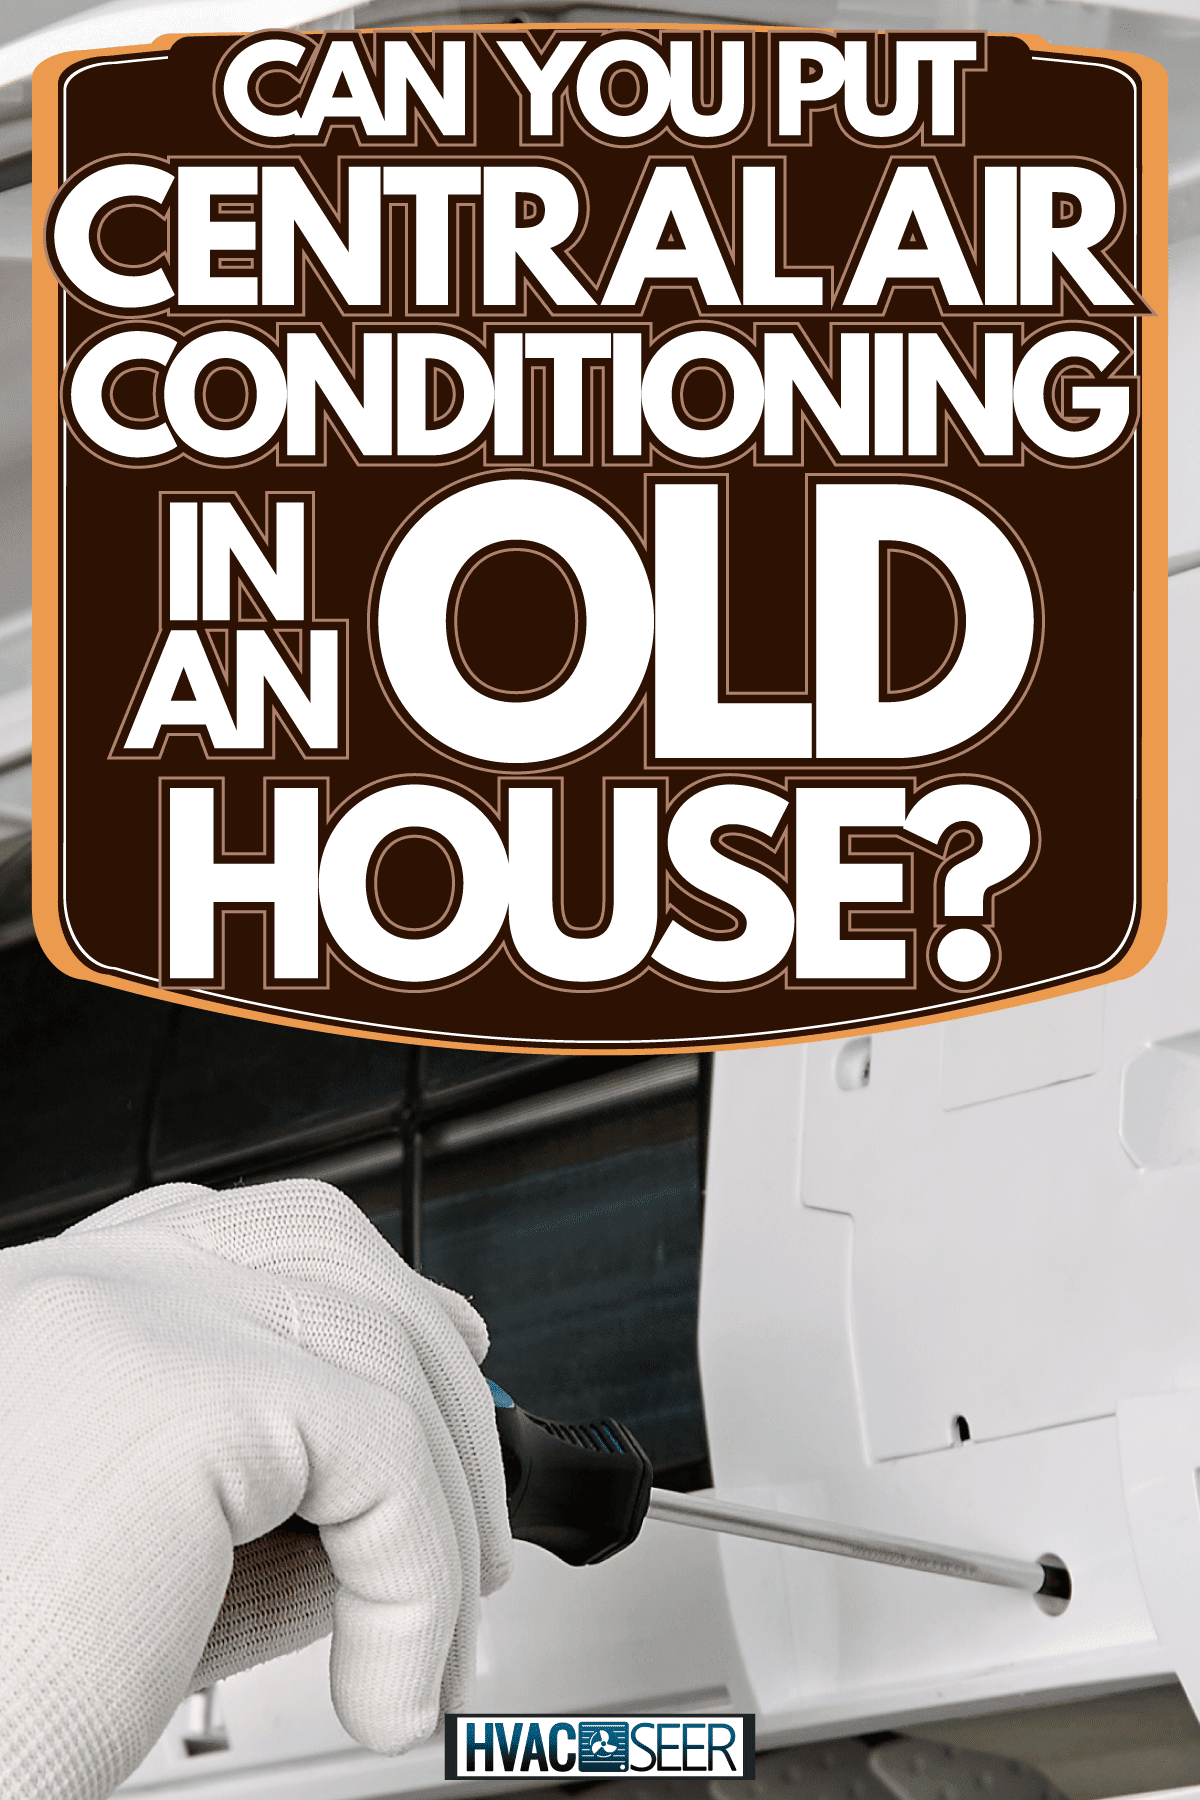 Installing an indoor air conditioner using a screwdriver, Can You Put Central Air Conditioning In An Old House?